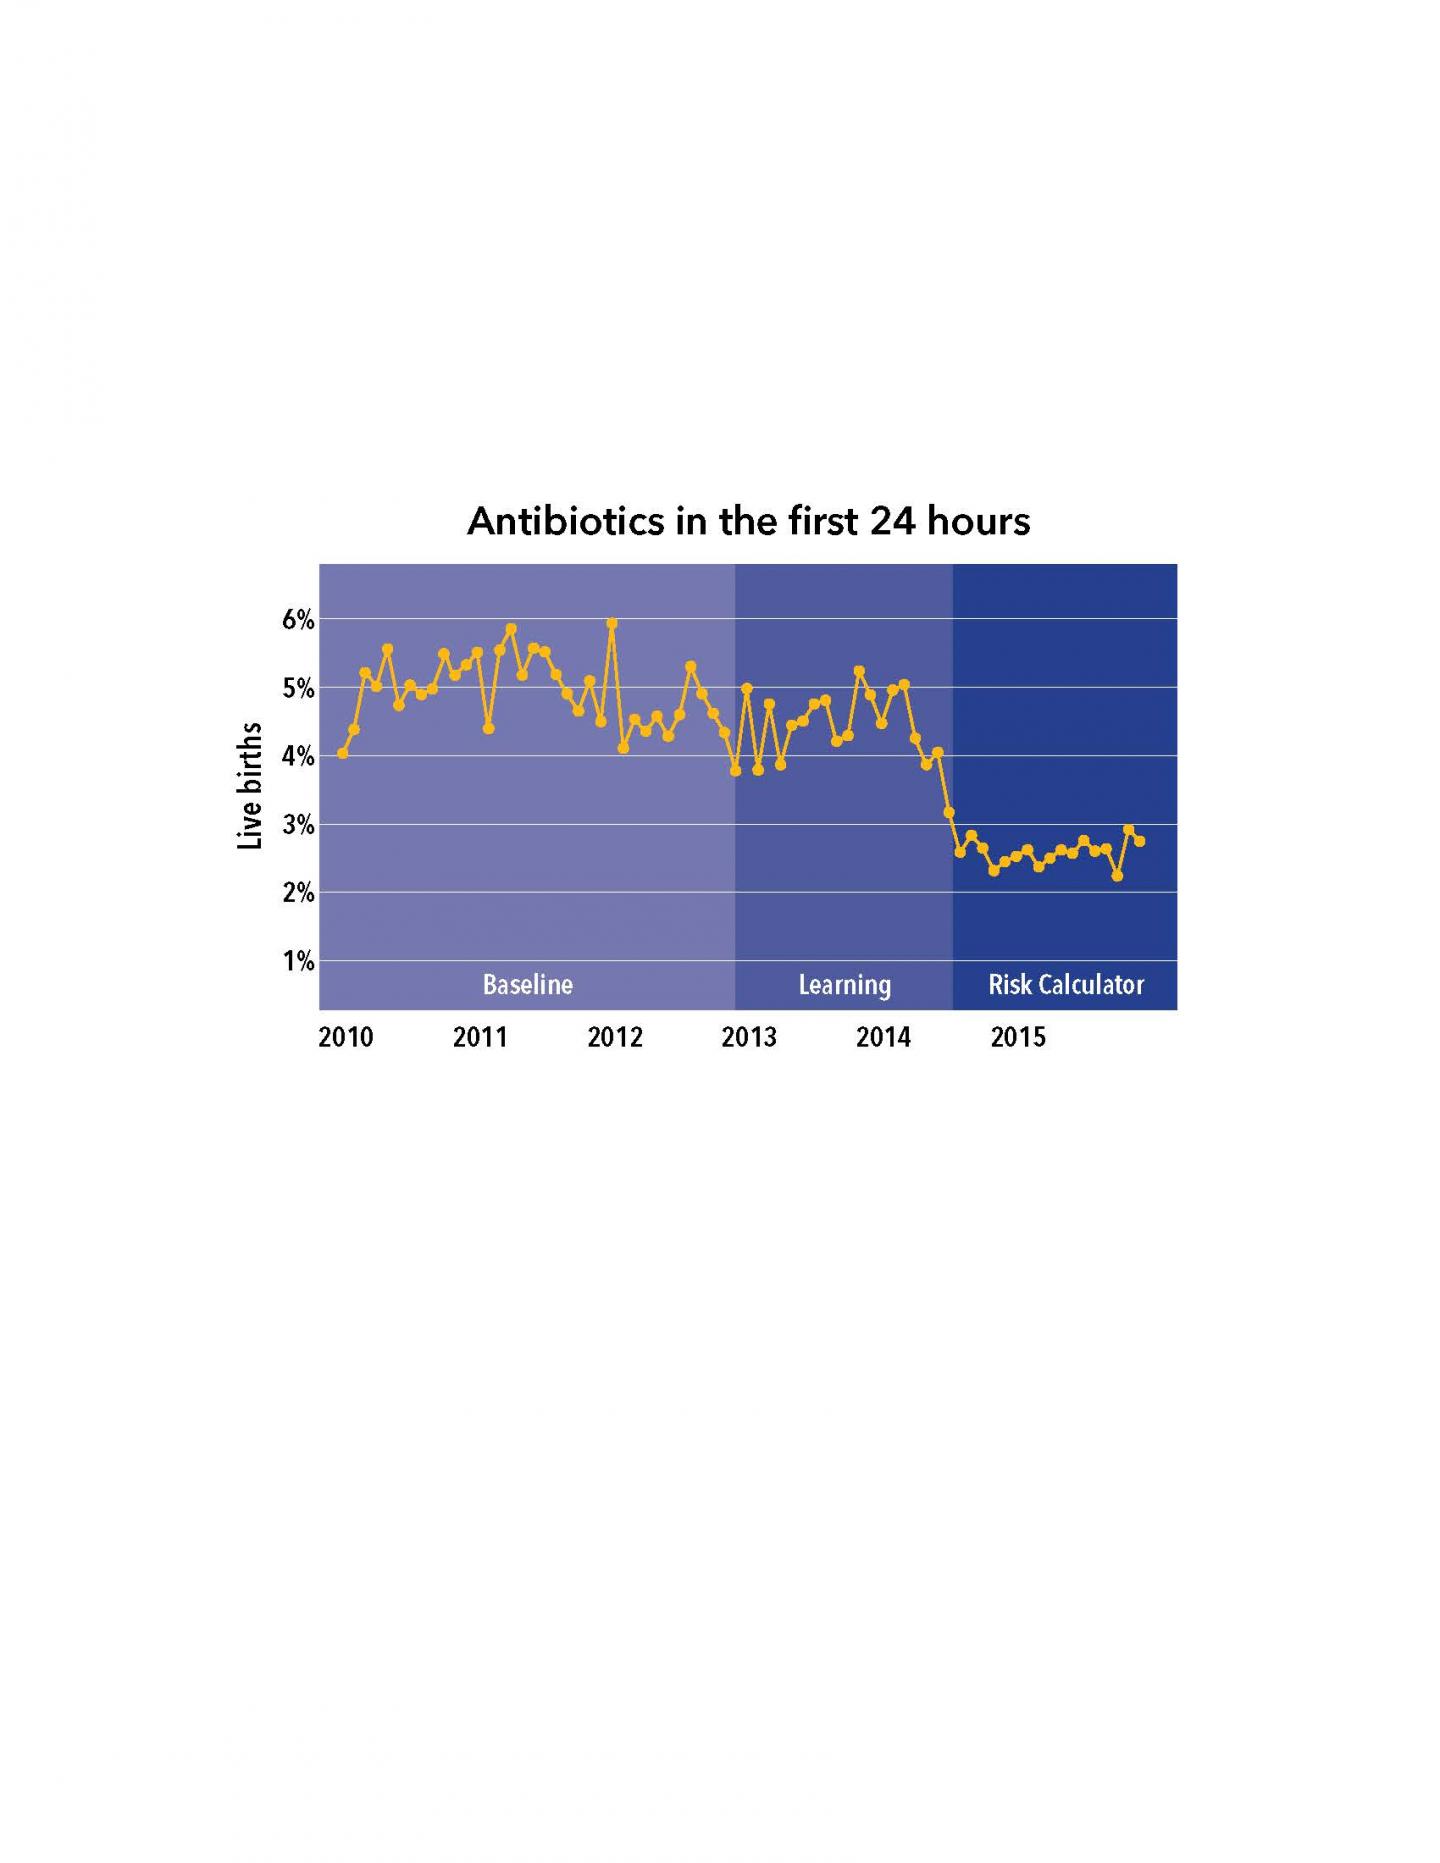 Antibiotic Use in the First 24 Hours 2010-2015